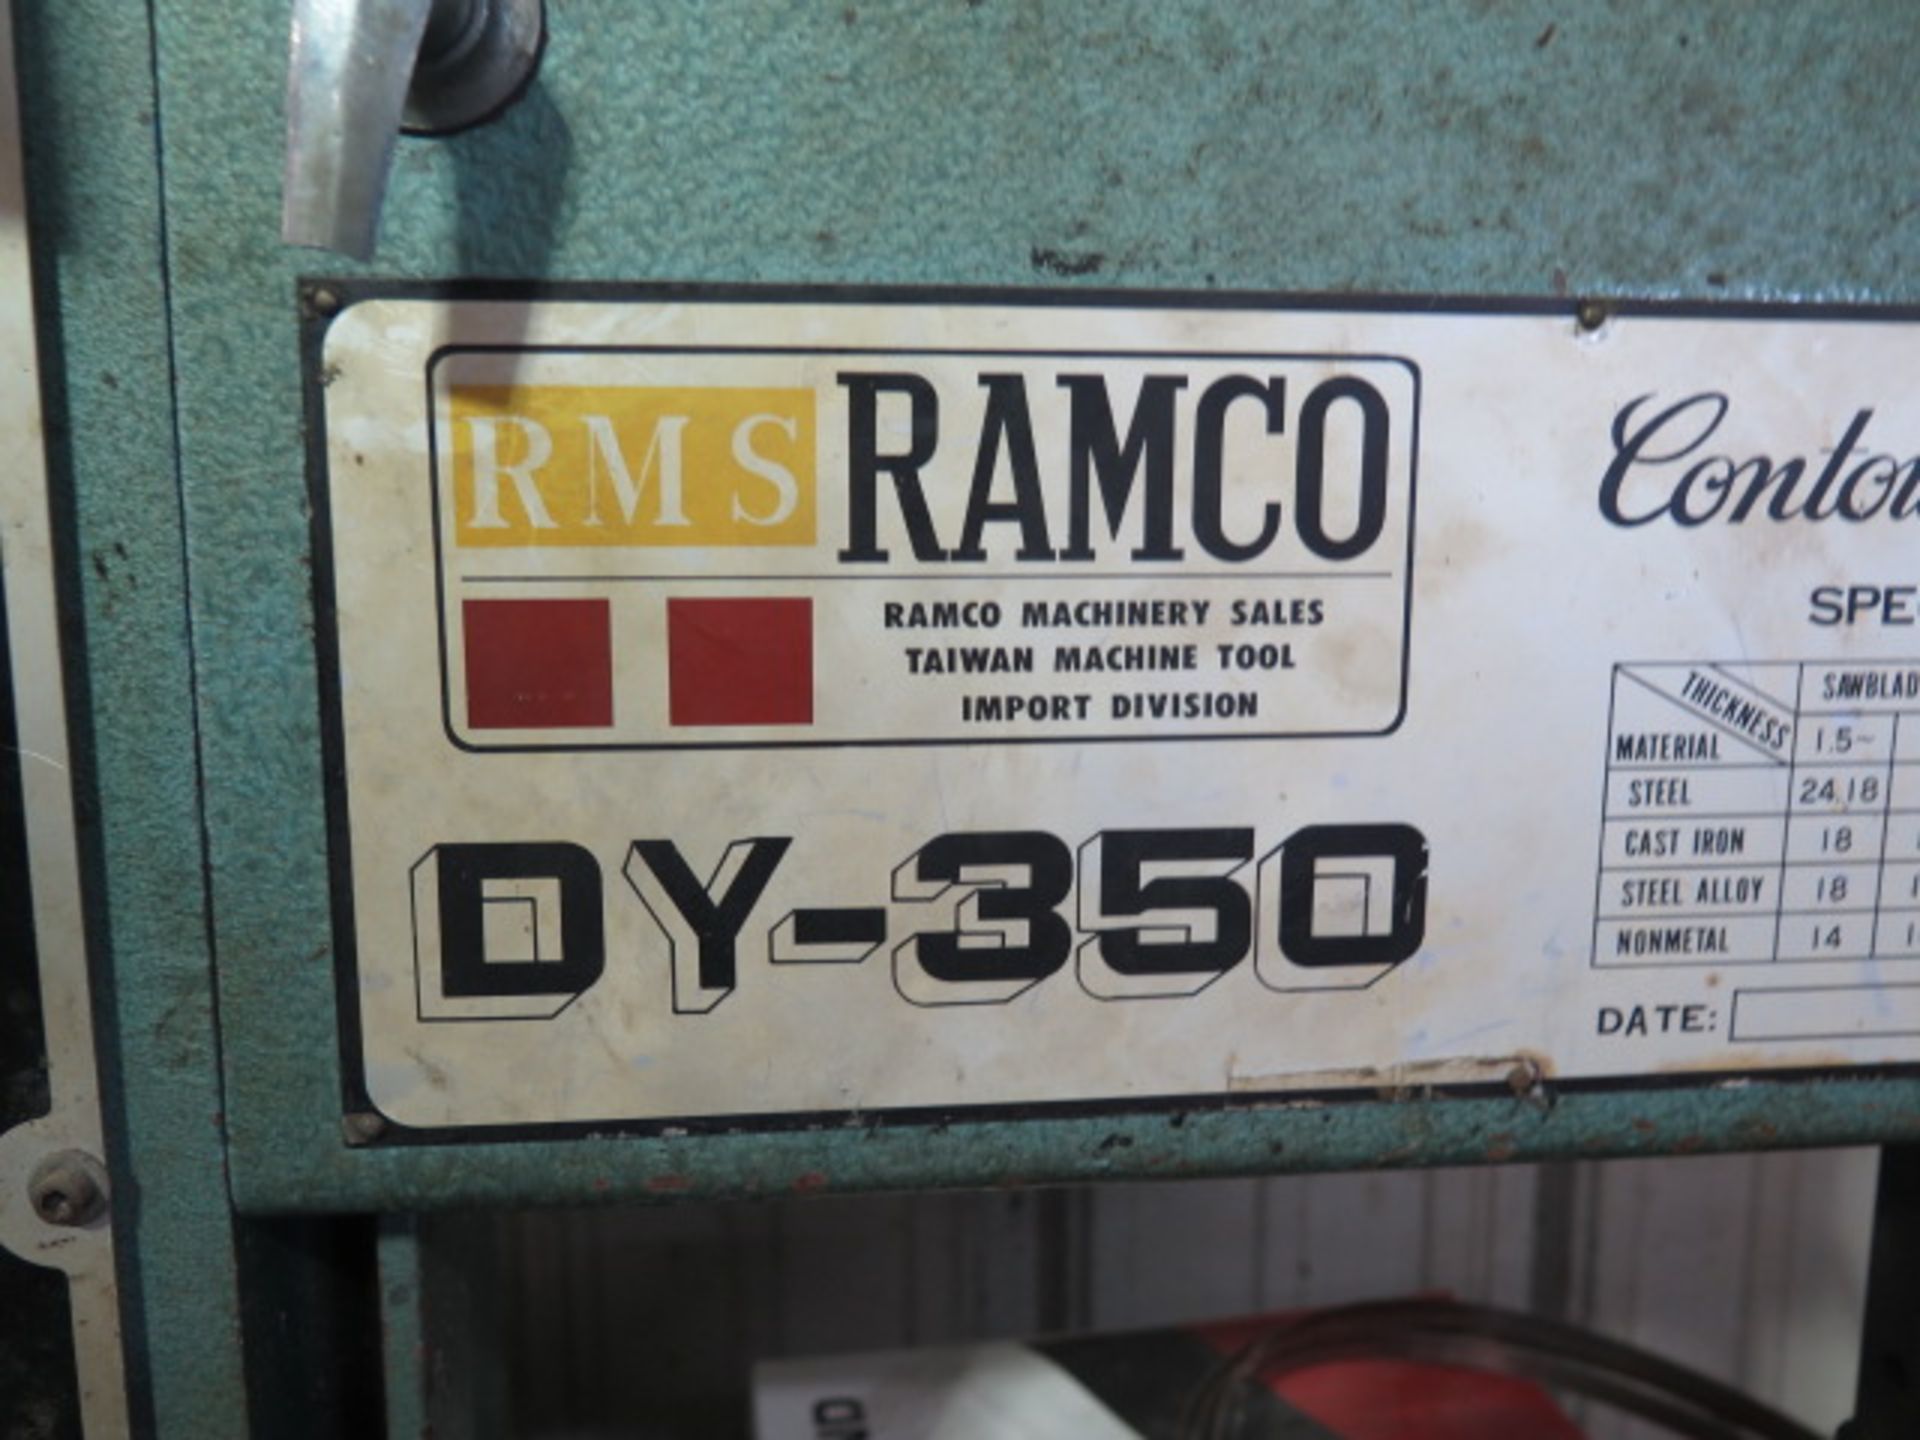 RMS Ramco mdl. DY-350 14” Vertical Band Saw s/n 685158 w/ Blade Welder, 19 ¾” x 21 ¼” Table - Image 3 of 7